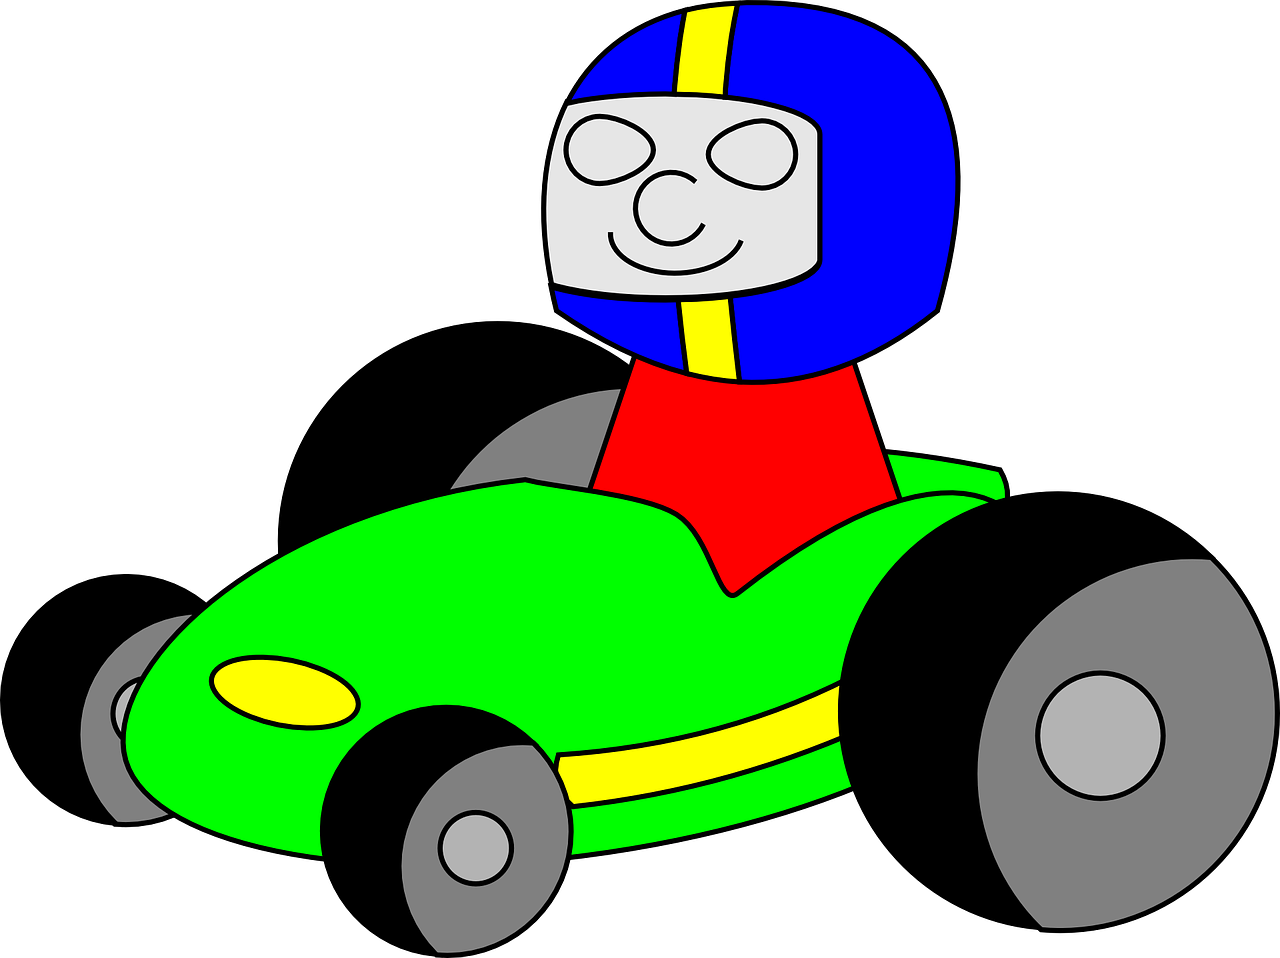 a cartoon character riding on top of a green car, inspired by Jim Davis, mingei, mspaint, flash photo, f 1, solid coloring